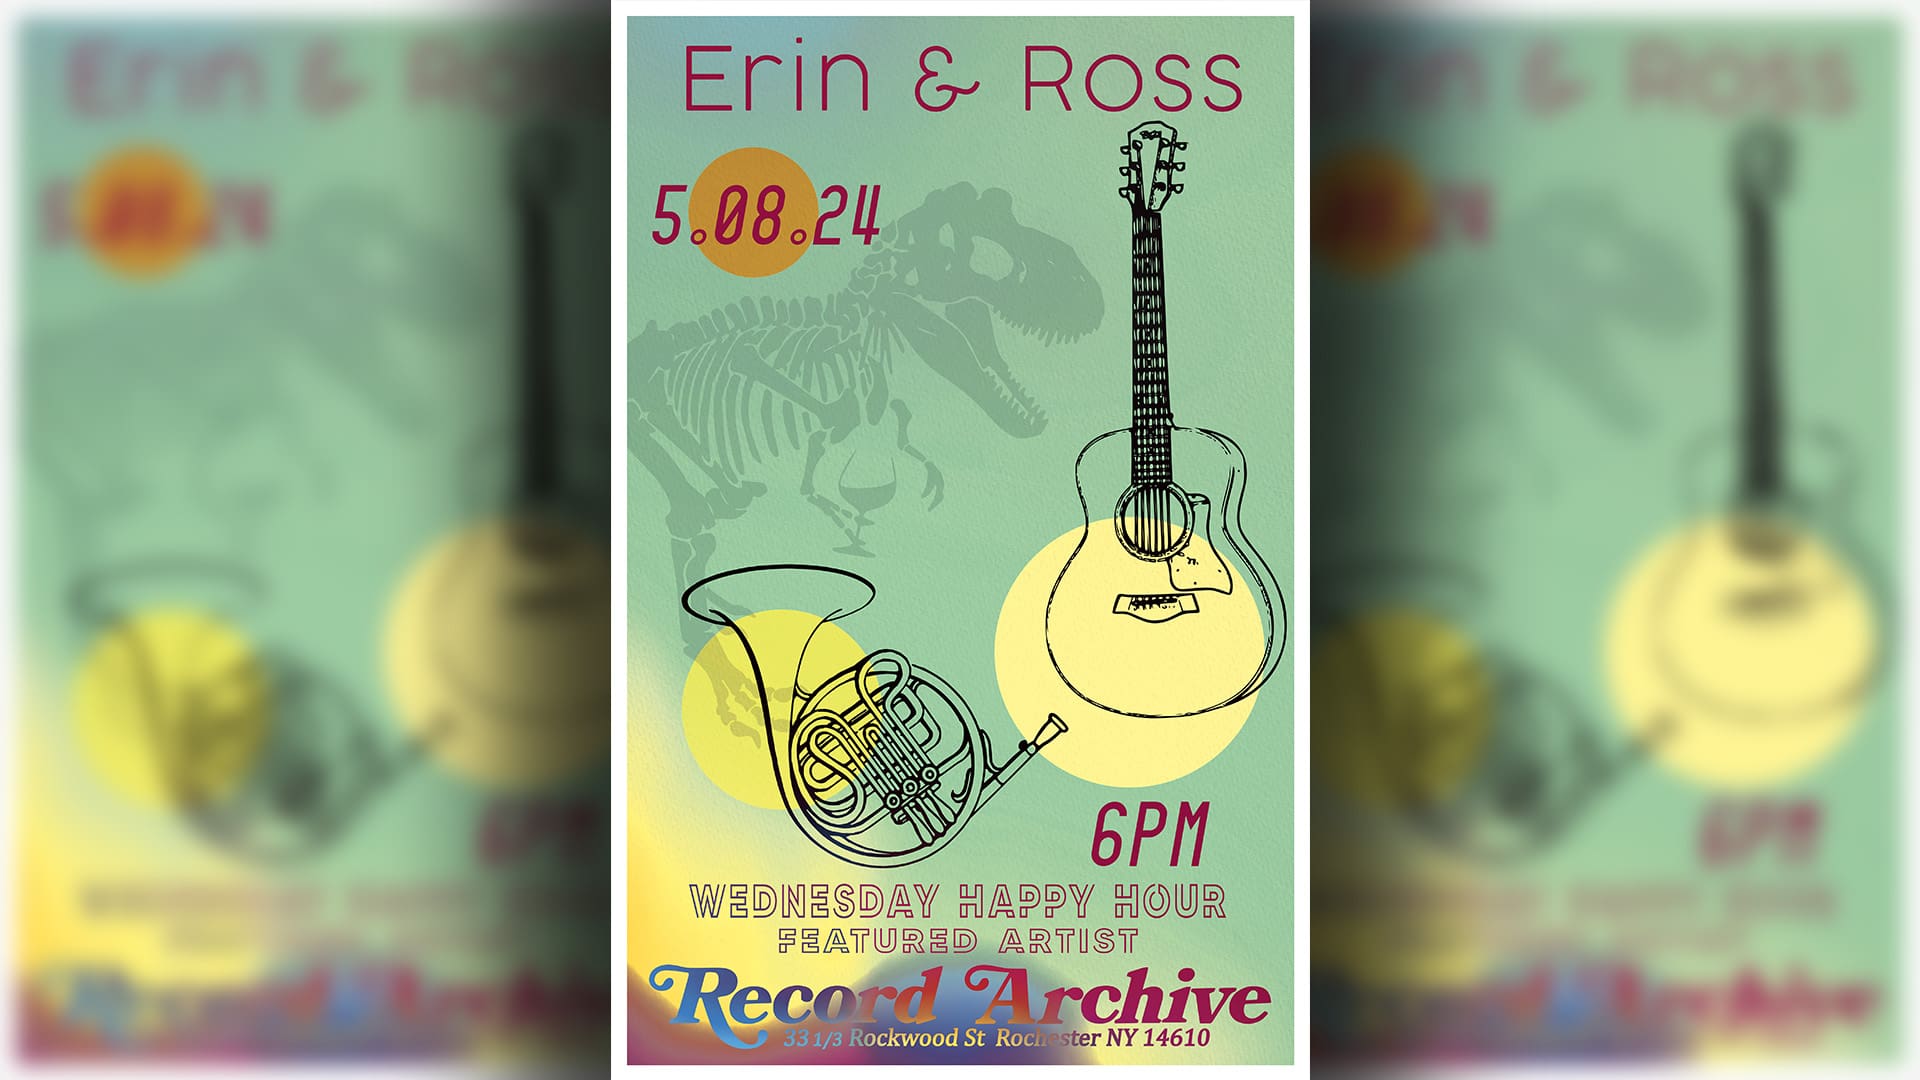 Erin & Ross 5.08.24 6PM Wednesday Happy Hour Featured Artist. Record Archive 33 1/3 Rockwood St Rochester NY 14610